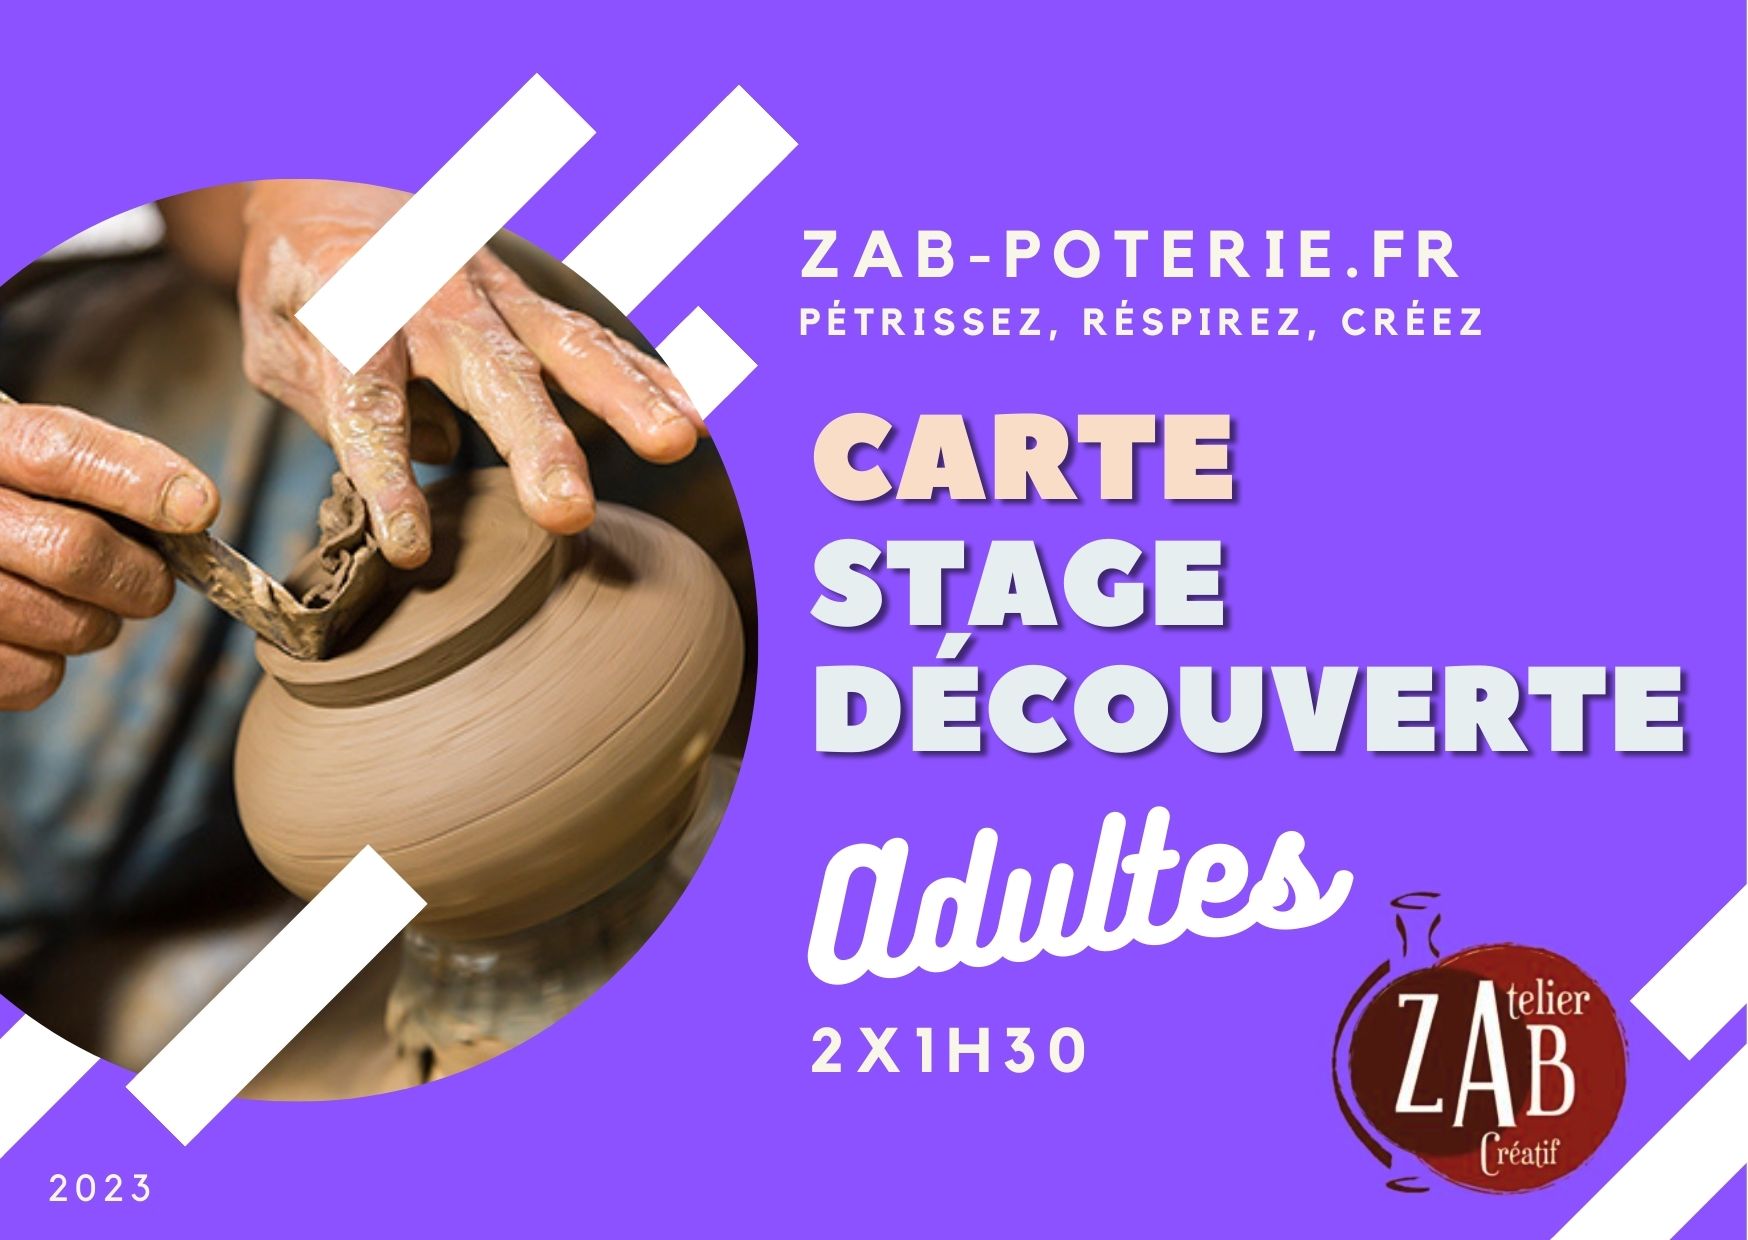 Poterie Adultes